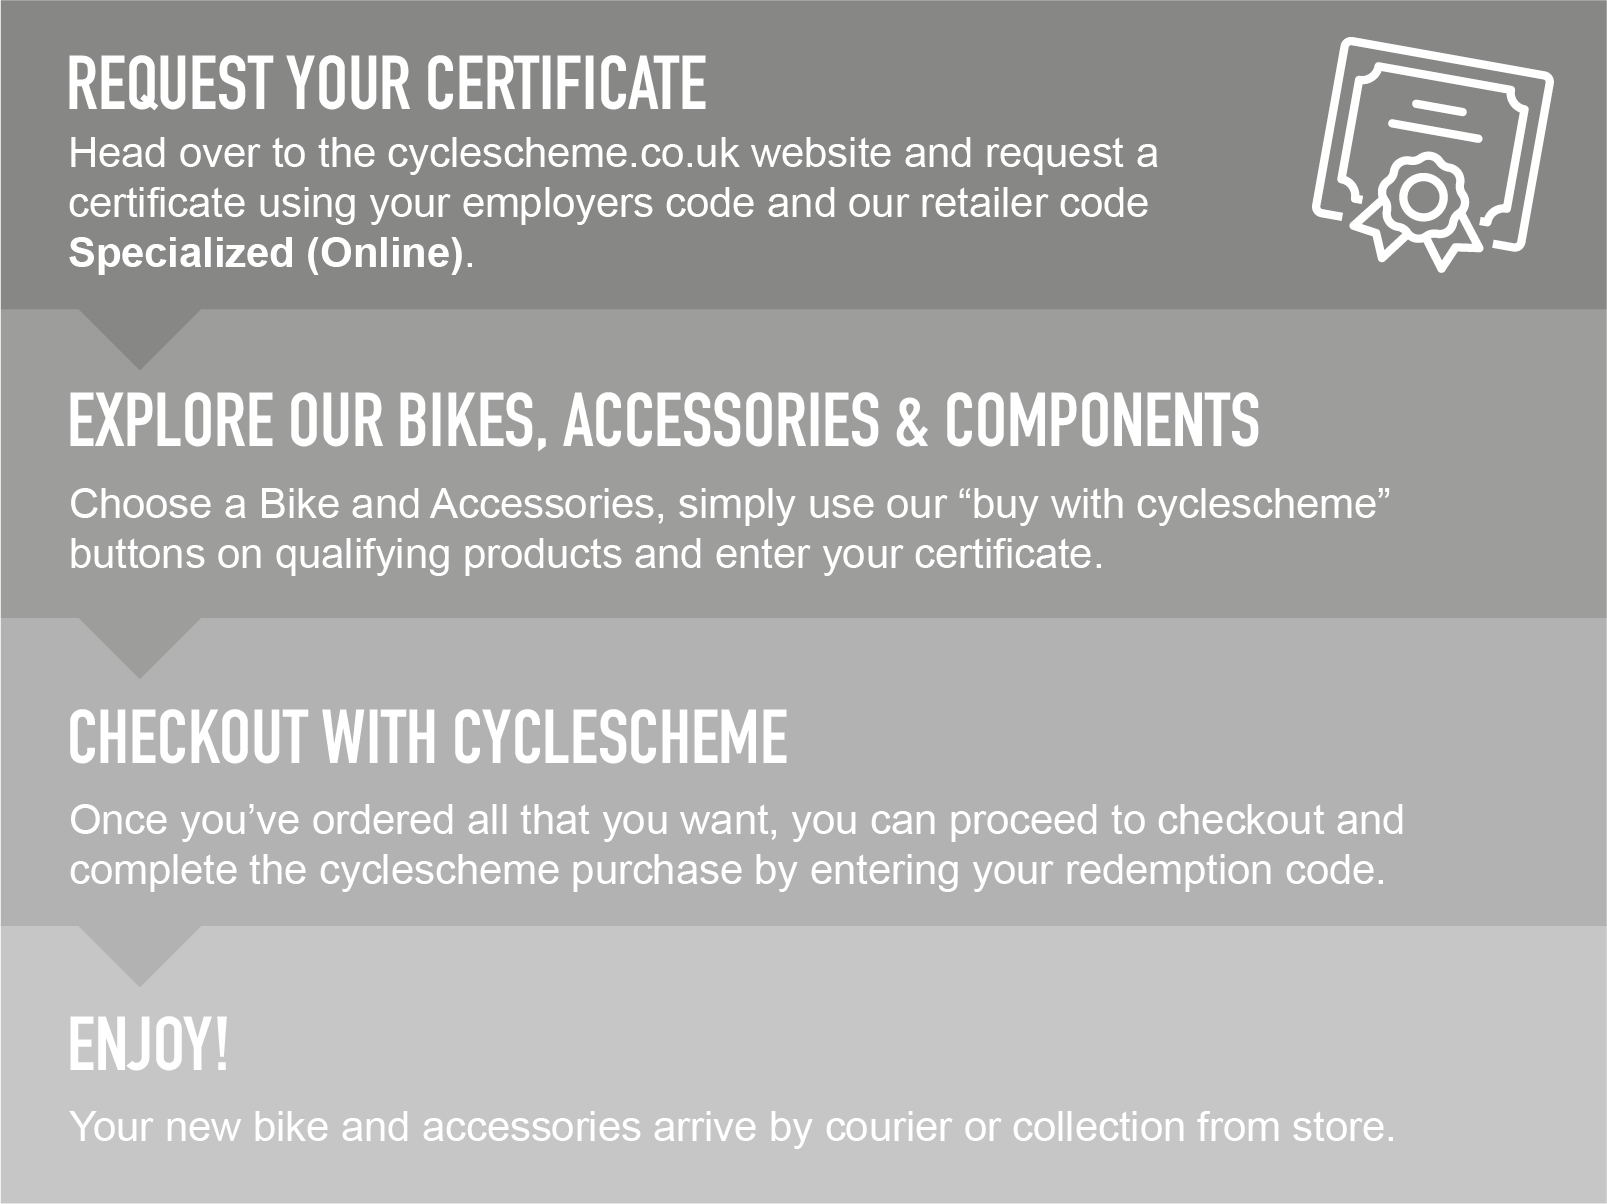 specialized online store